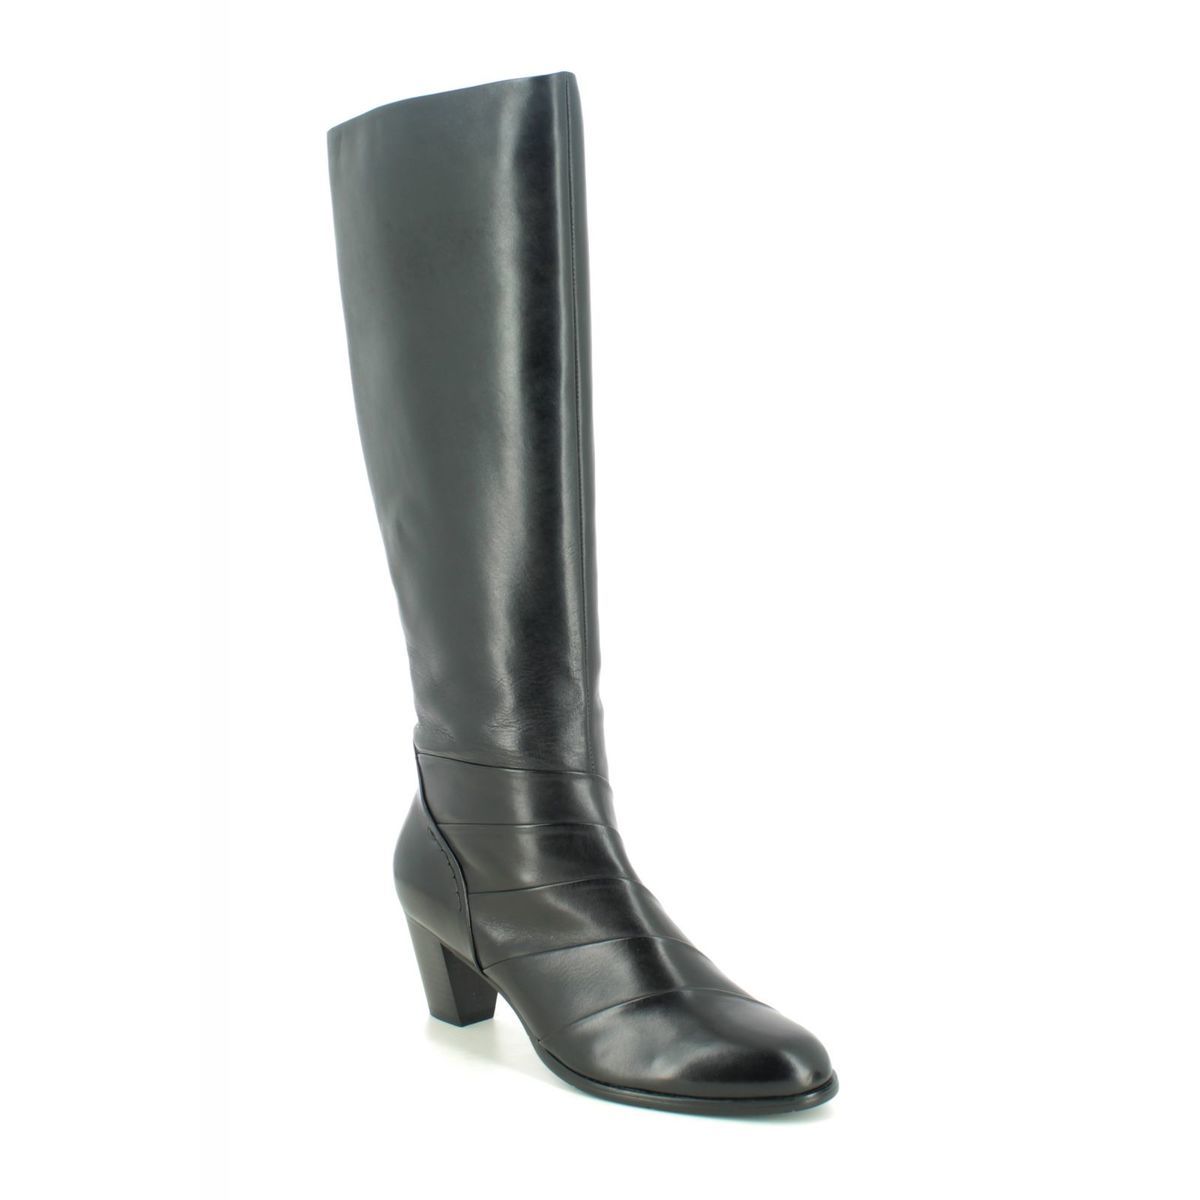 Regarde le Ciel Sonia 75 Black leather Womens knee-high boots 2075-003 in a Plain Leather in Size 37